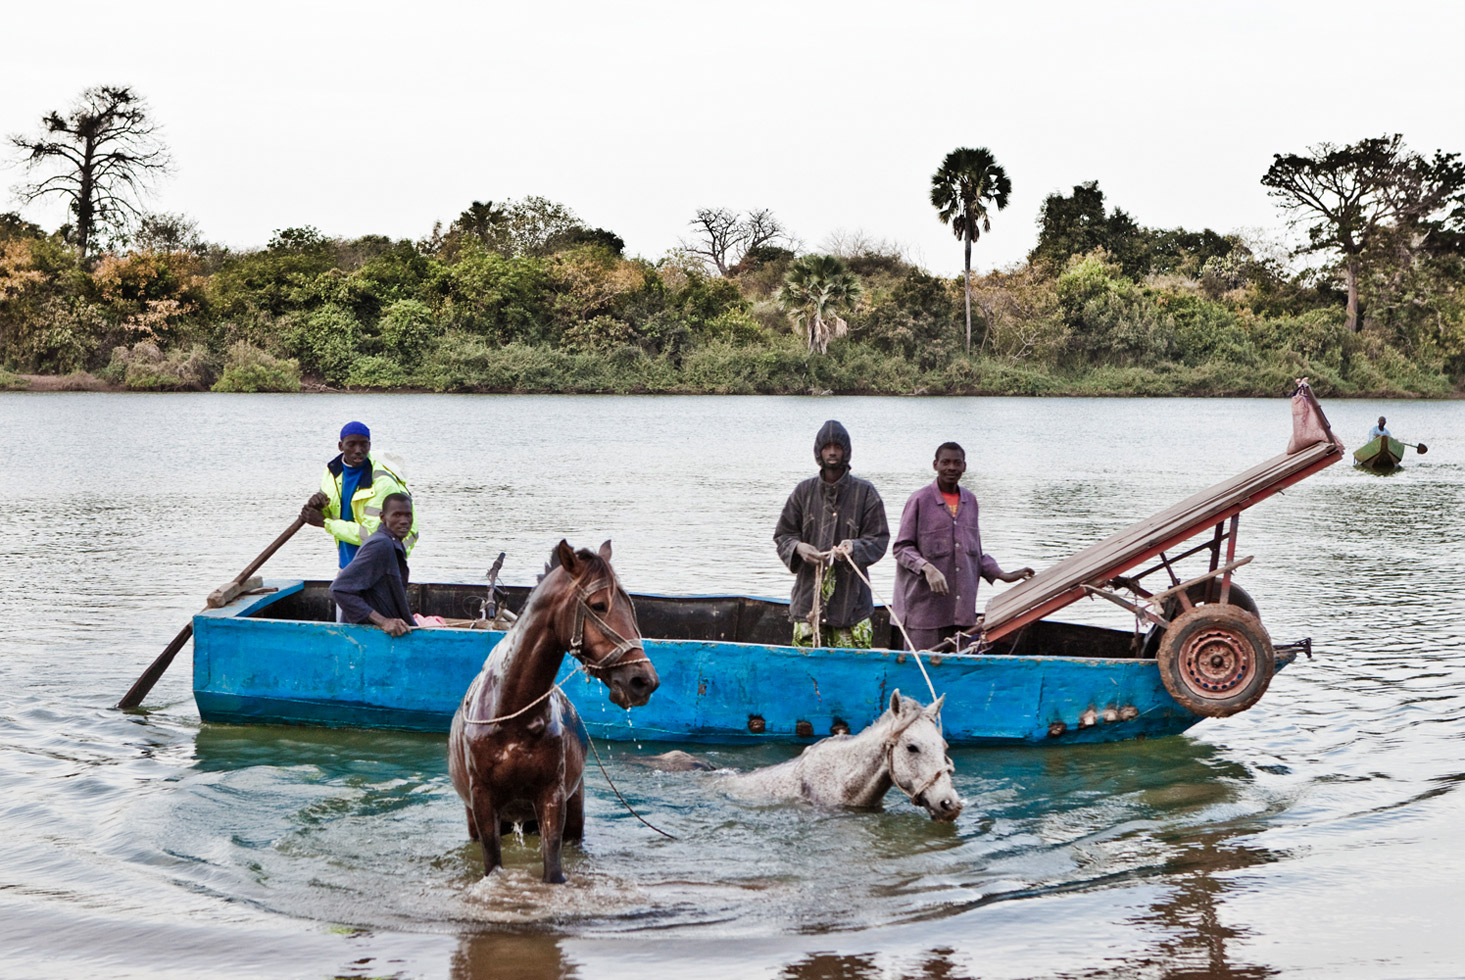 Men from the Fula tribe swim their horses across River Gambia next to a local ferry at the village of Karantaba where the famous Scottish explorer, Mungo Park, set off for two of his journeys in search of the Niger river 200 years ago.